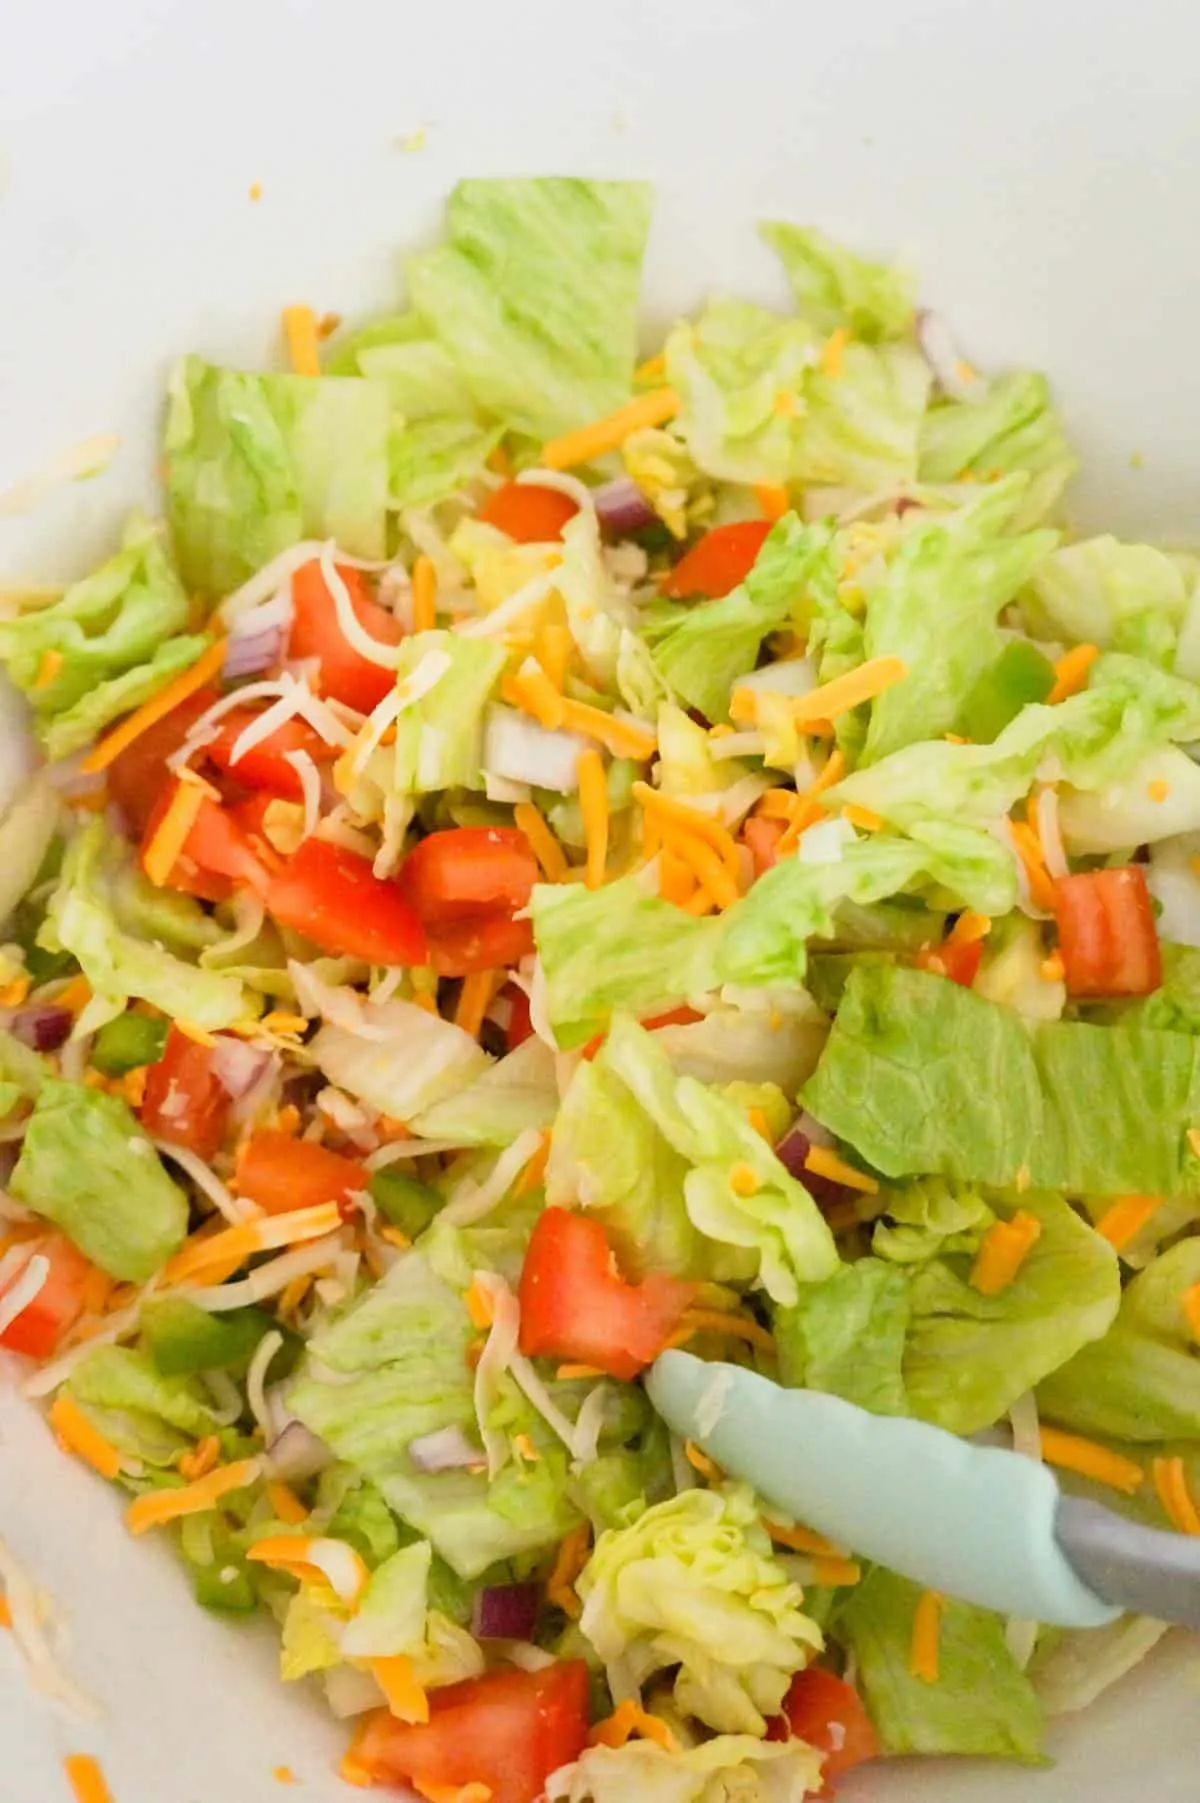 tossed salad in a mixing bowl